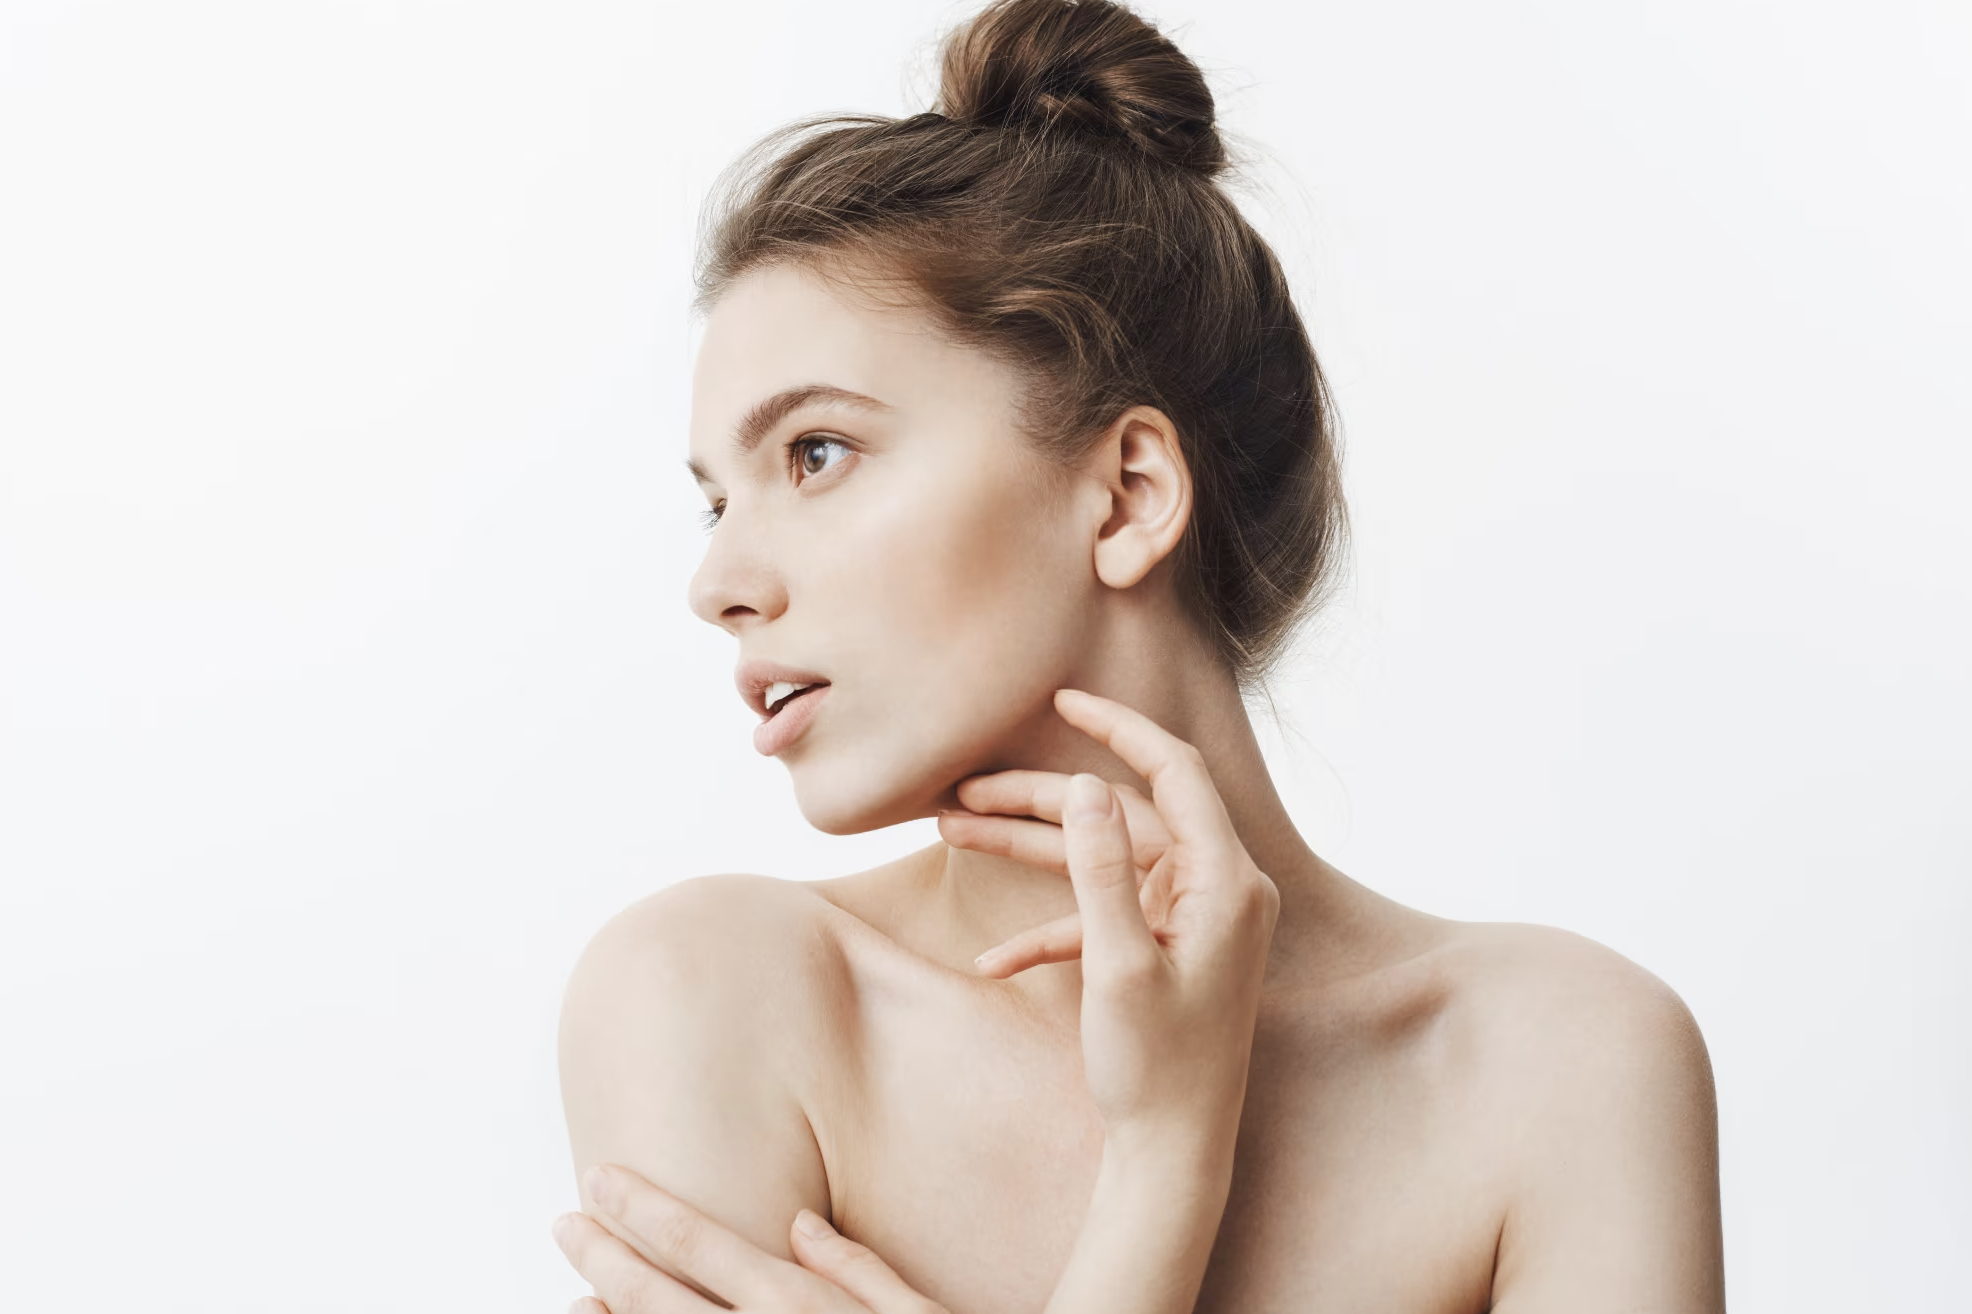 What Are the Risks and Benefits of a Nose Tip Aesthetic?